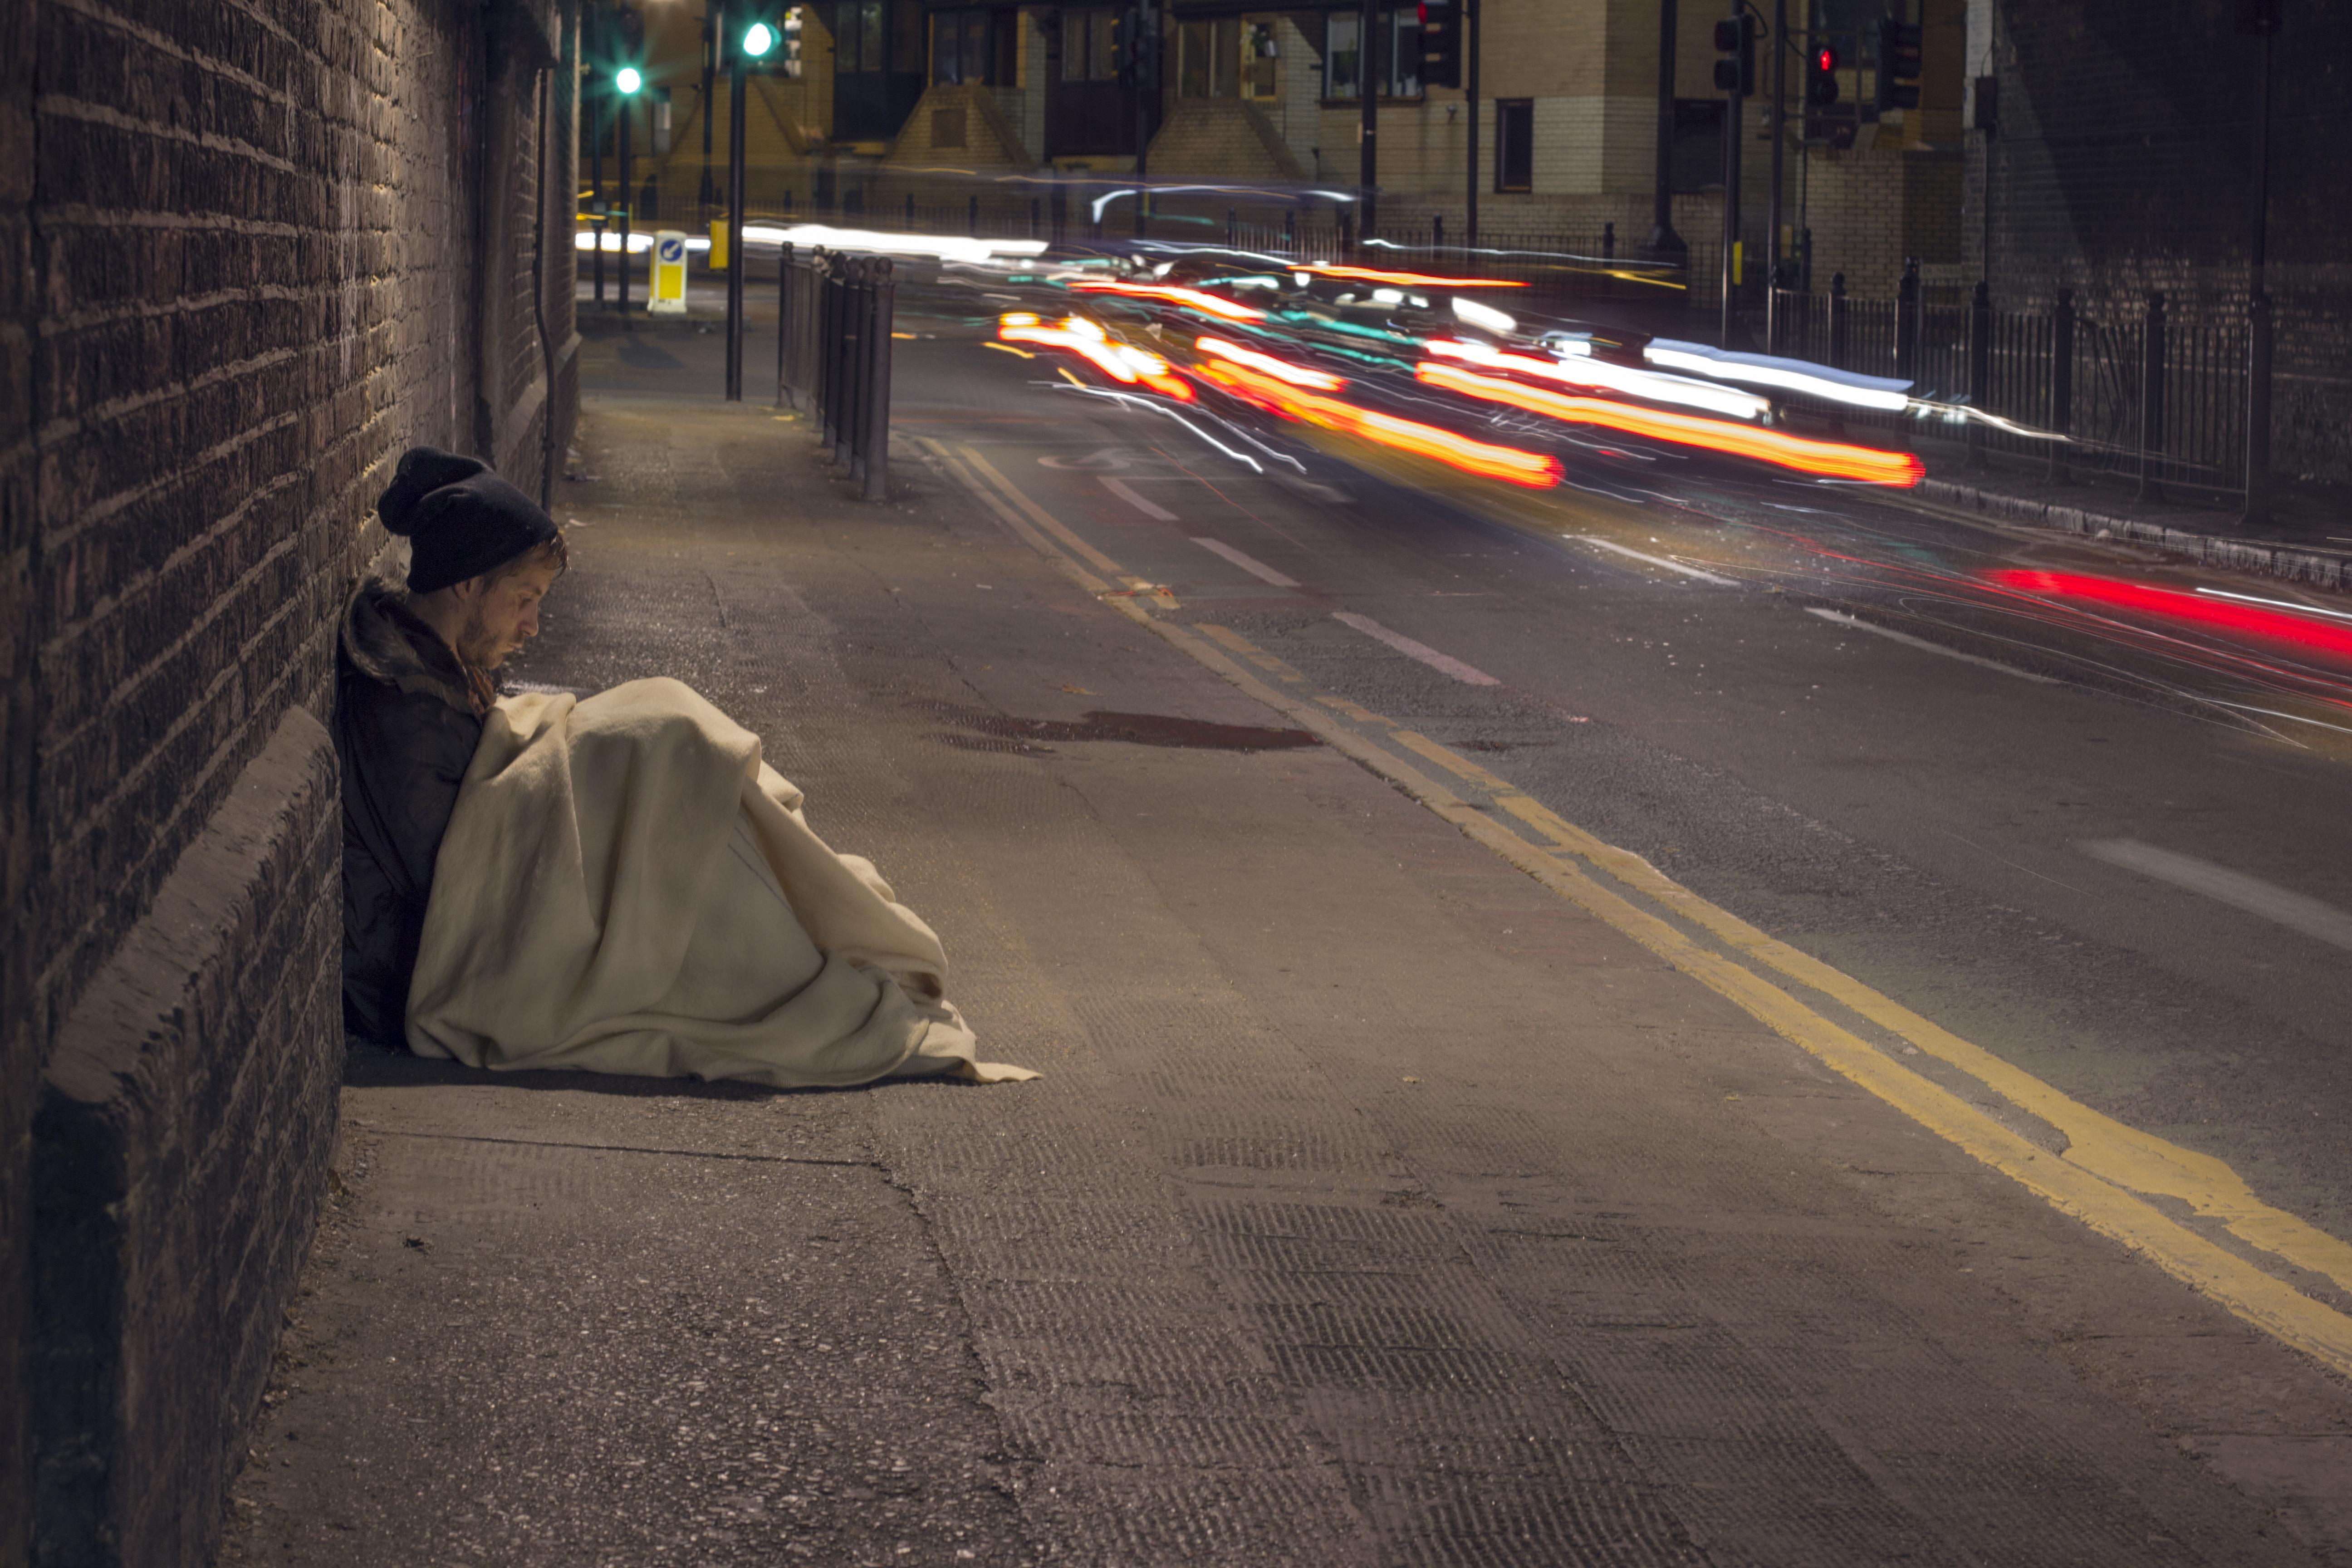 Facts about Homelessness